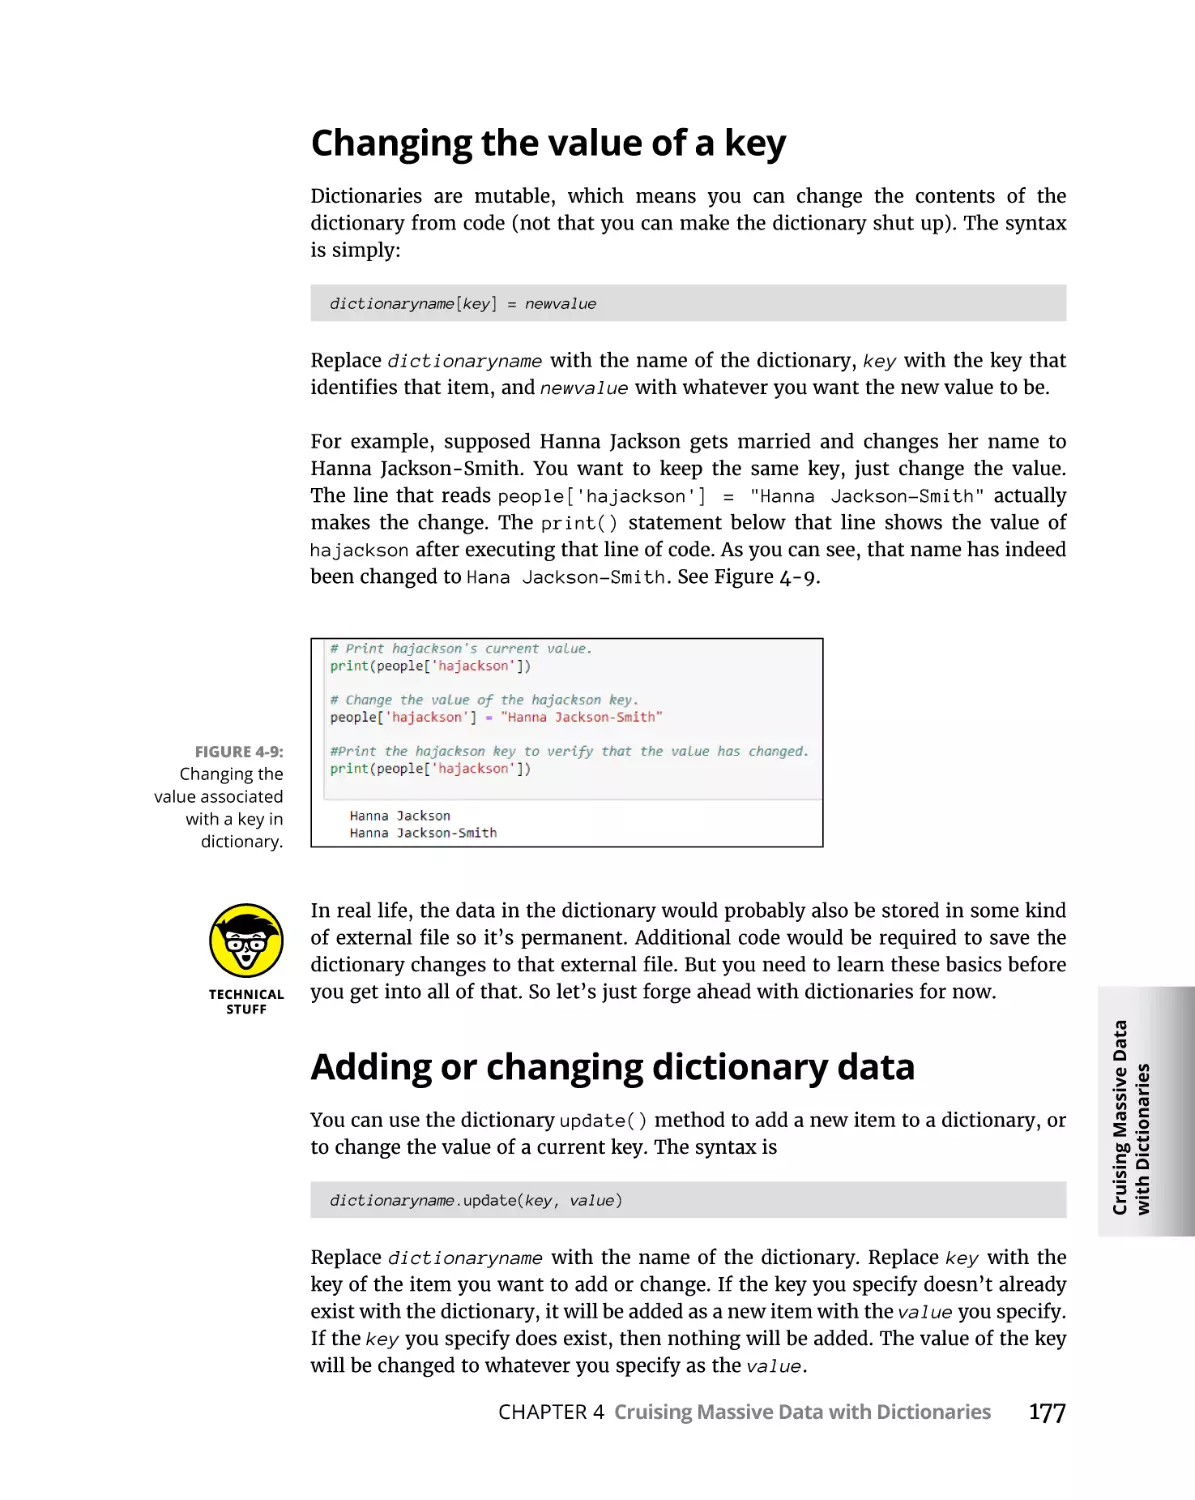 Changing the value of a key
Adding or changing dictionary data